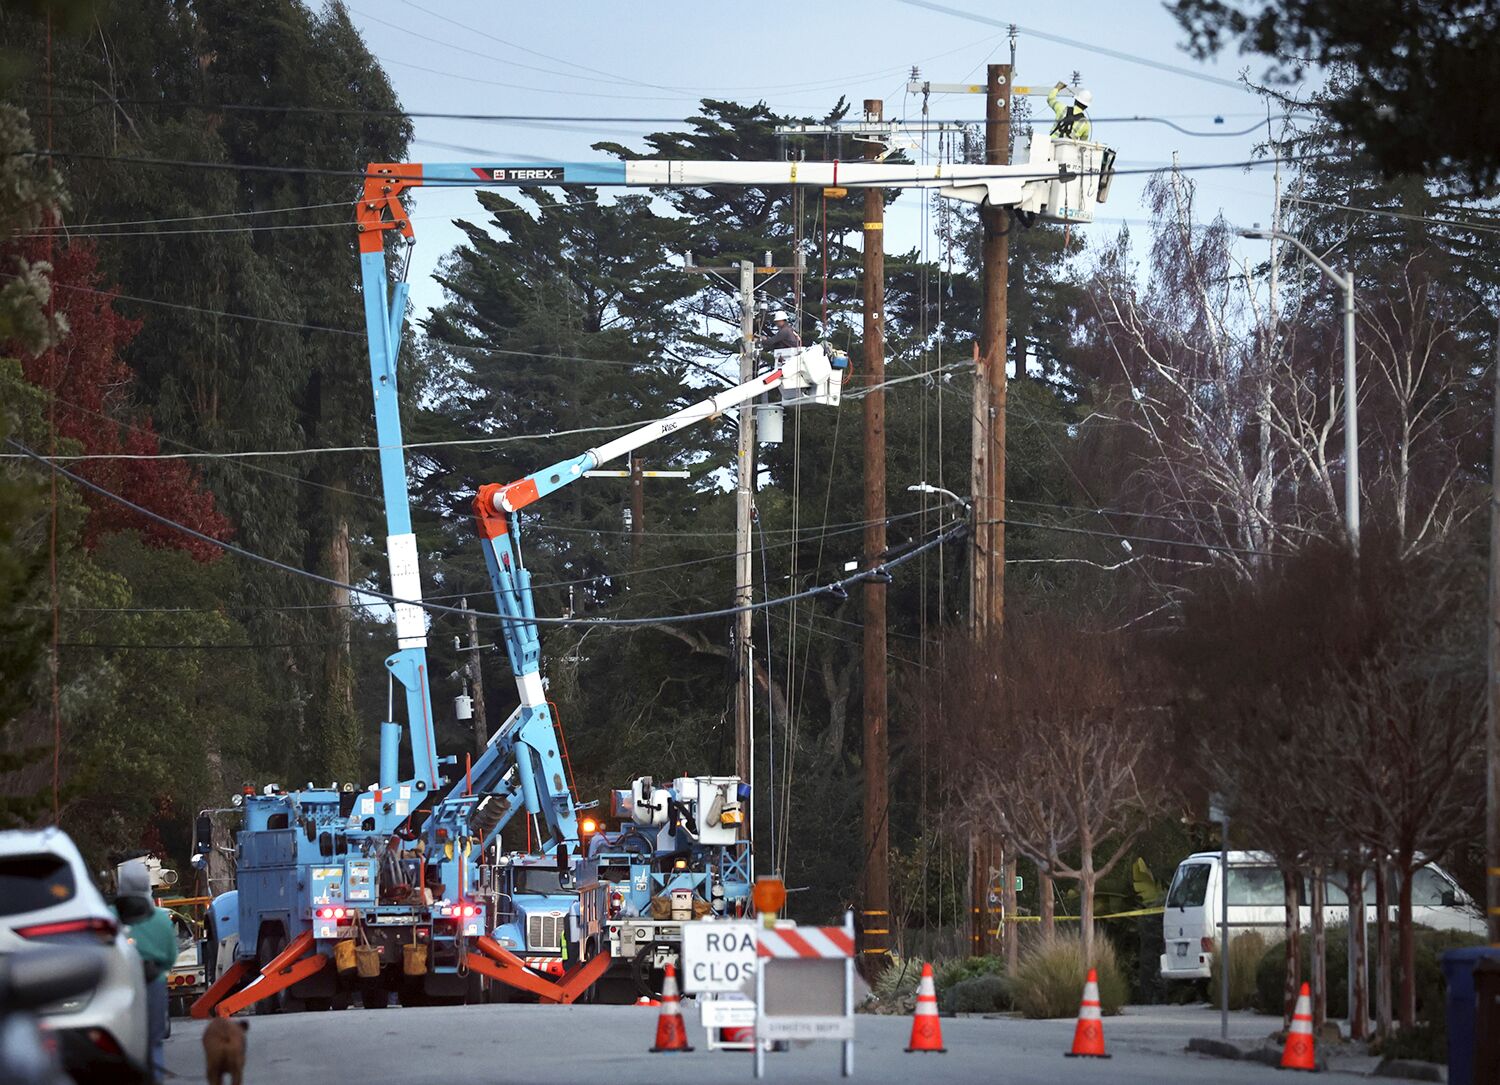 Mass storm outages bring misery across California, exposing power grid's vulnerabilities